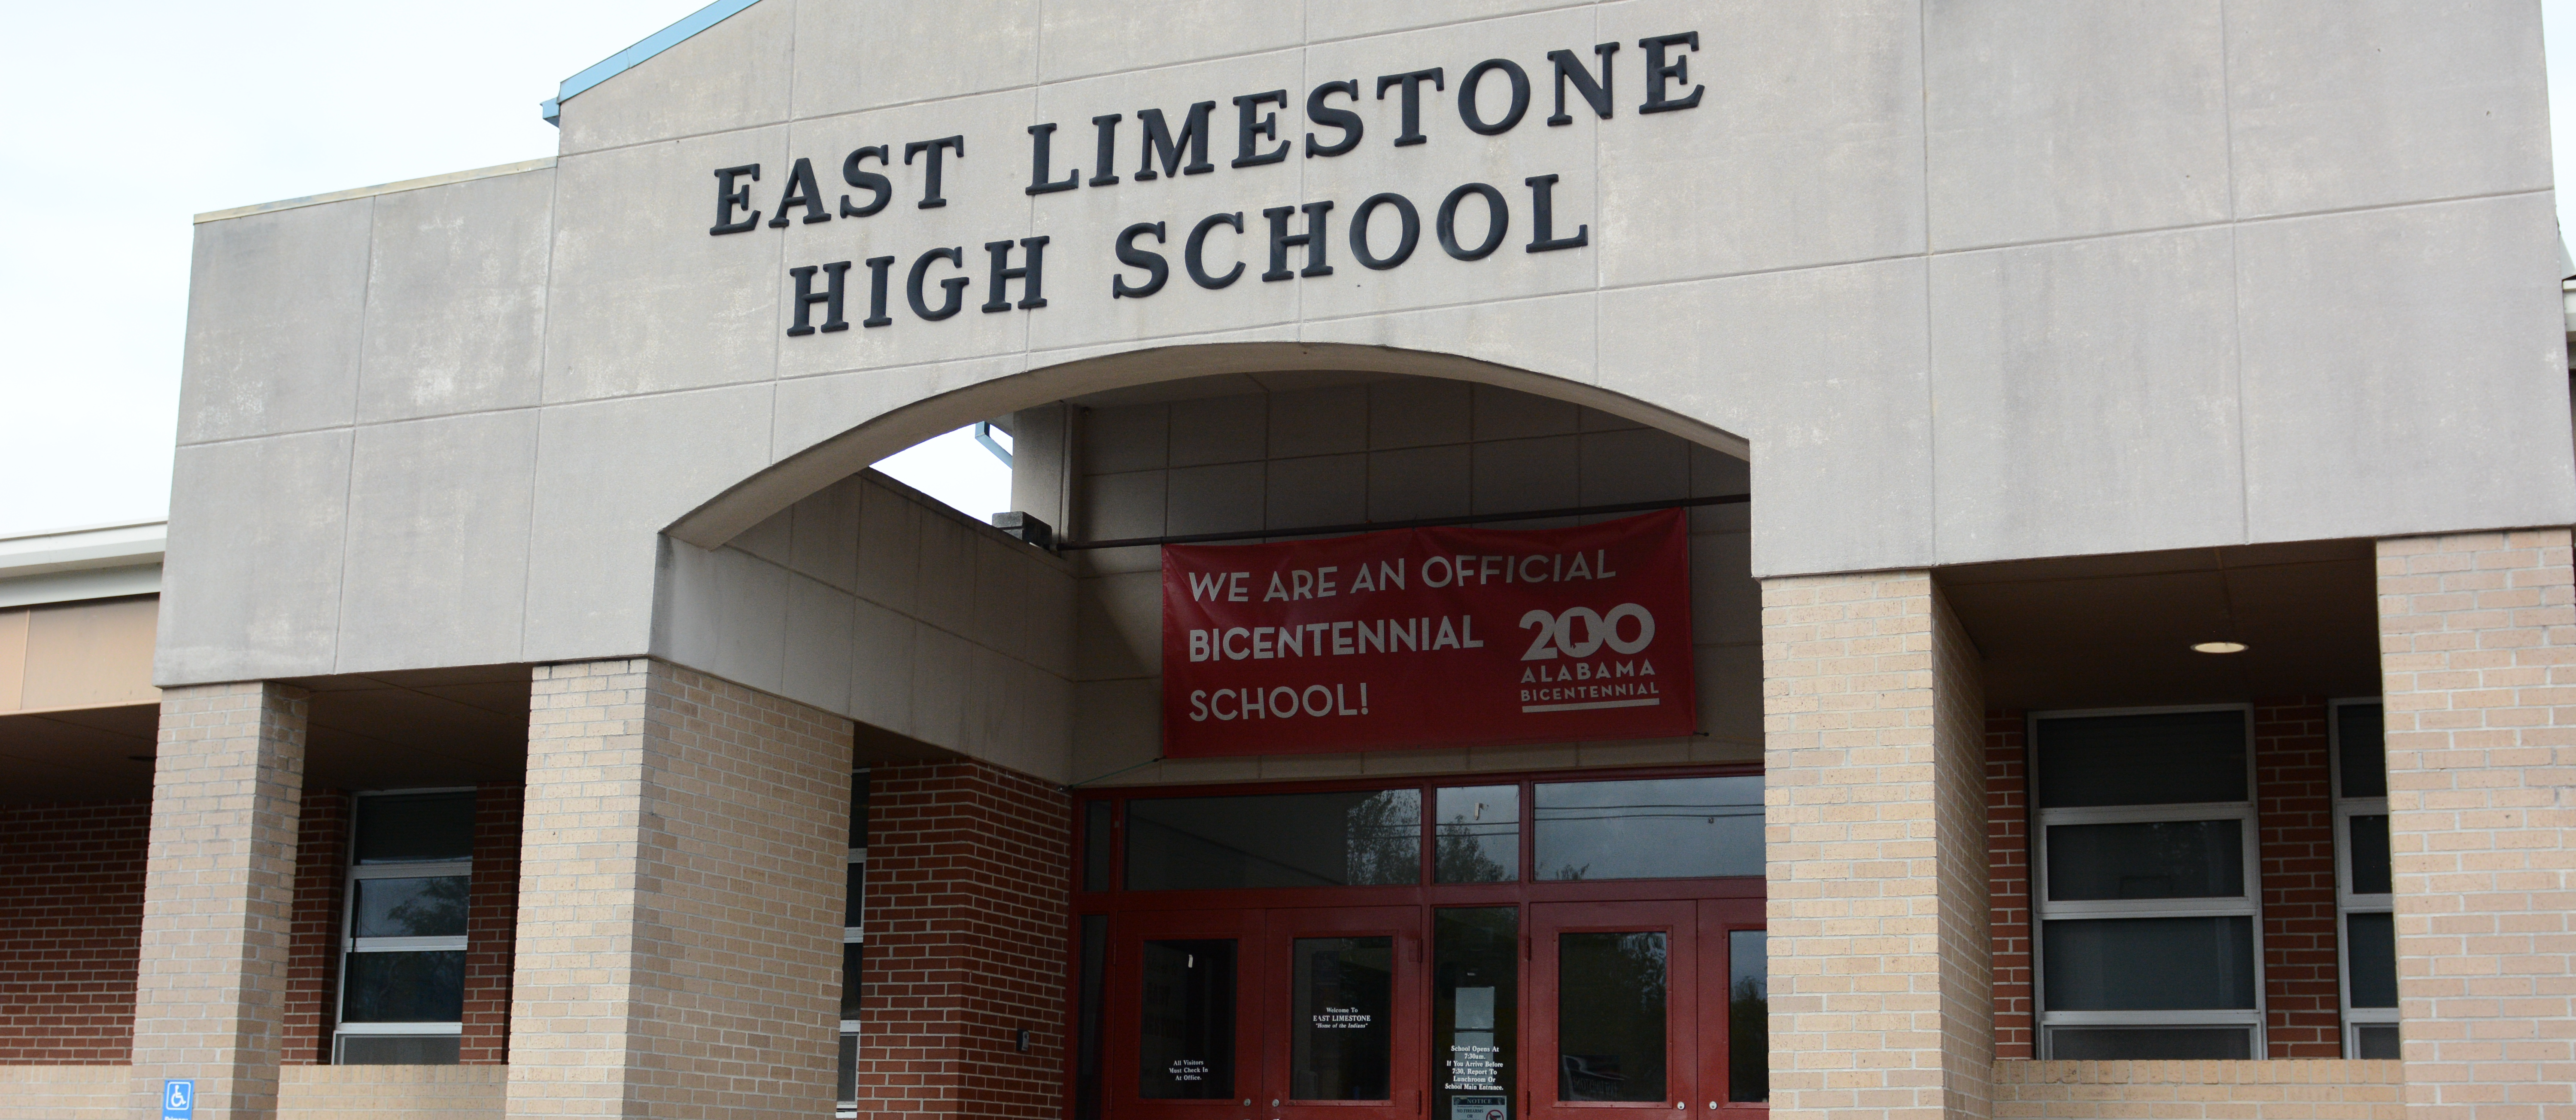 east limestone high school front of building